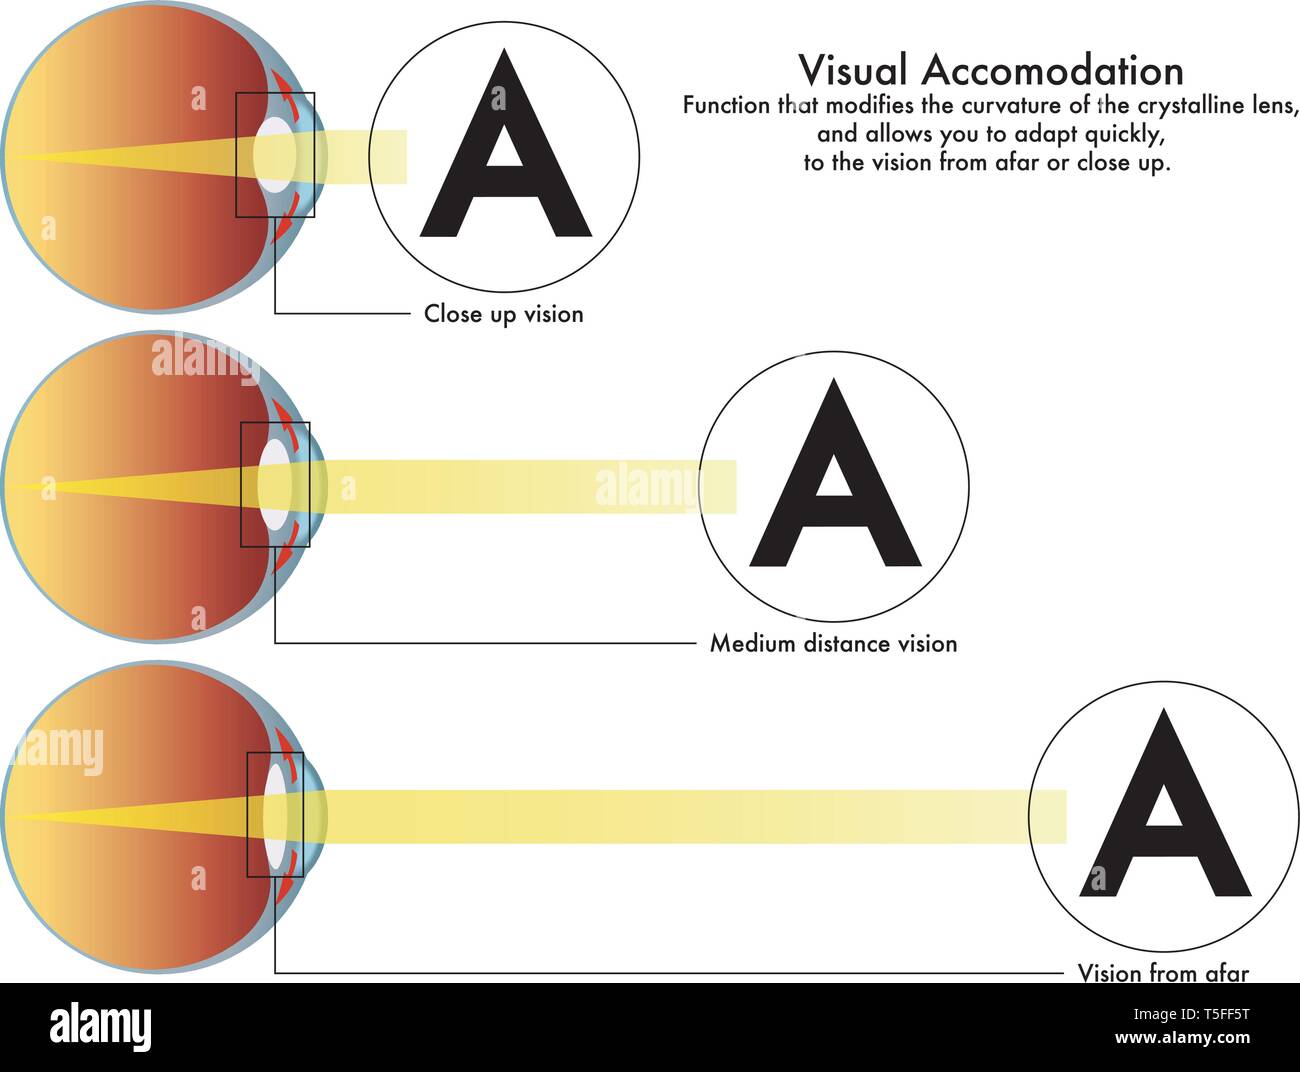 visual accommodation, that modifies the curvature of the crystalline lens, and allows you to adapt quickly to the vision from afar or close up. Stock Vector